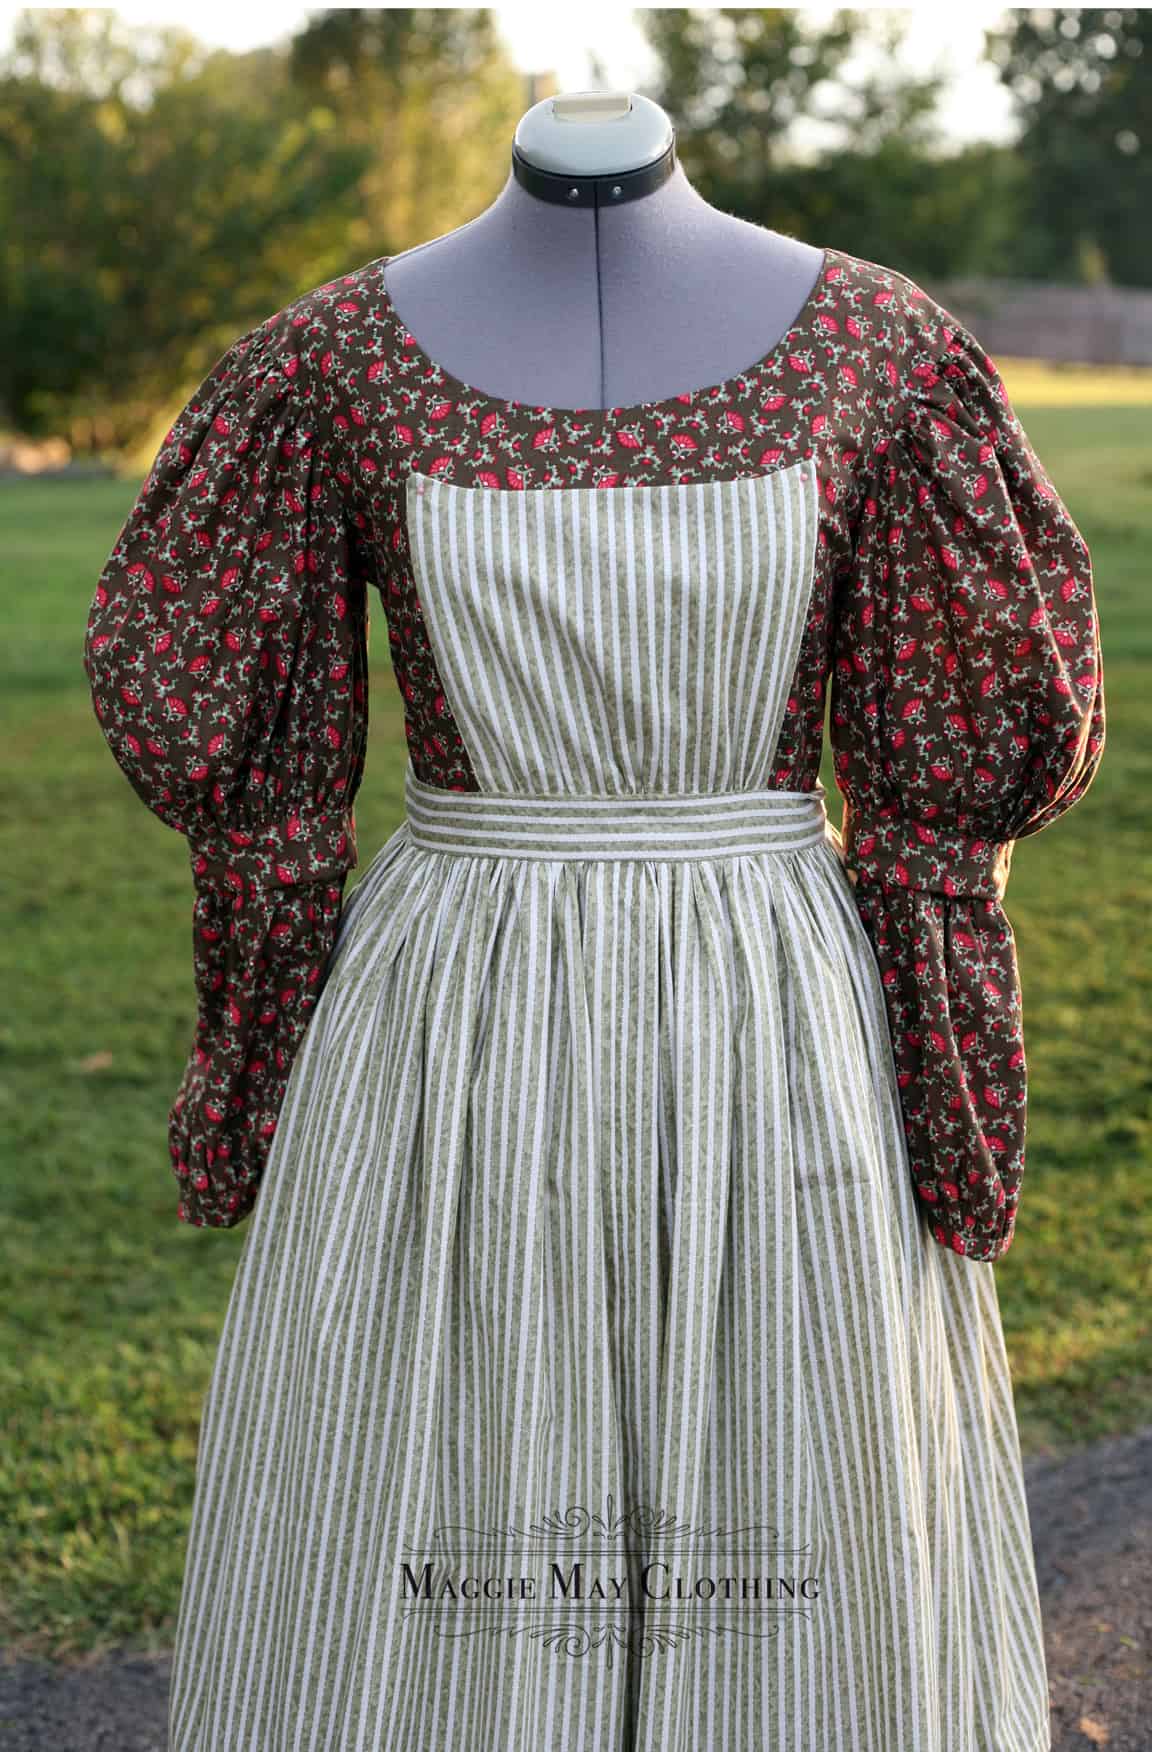 The Evolution of 19th Century Peasant Dress: Exploring the Fashion of Rural Communities